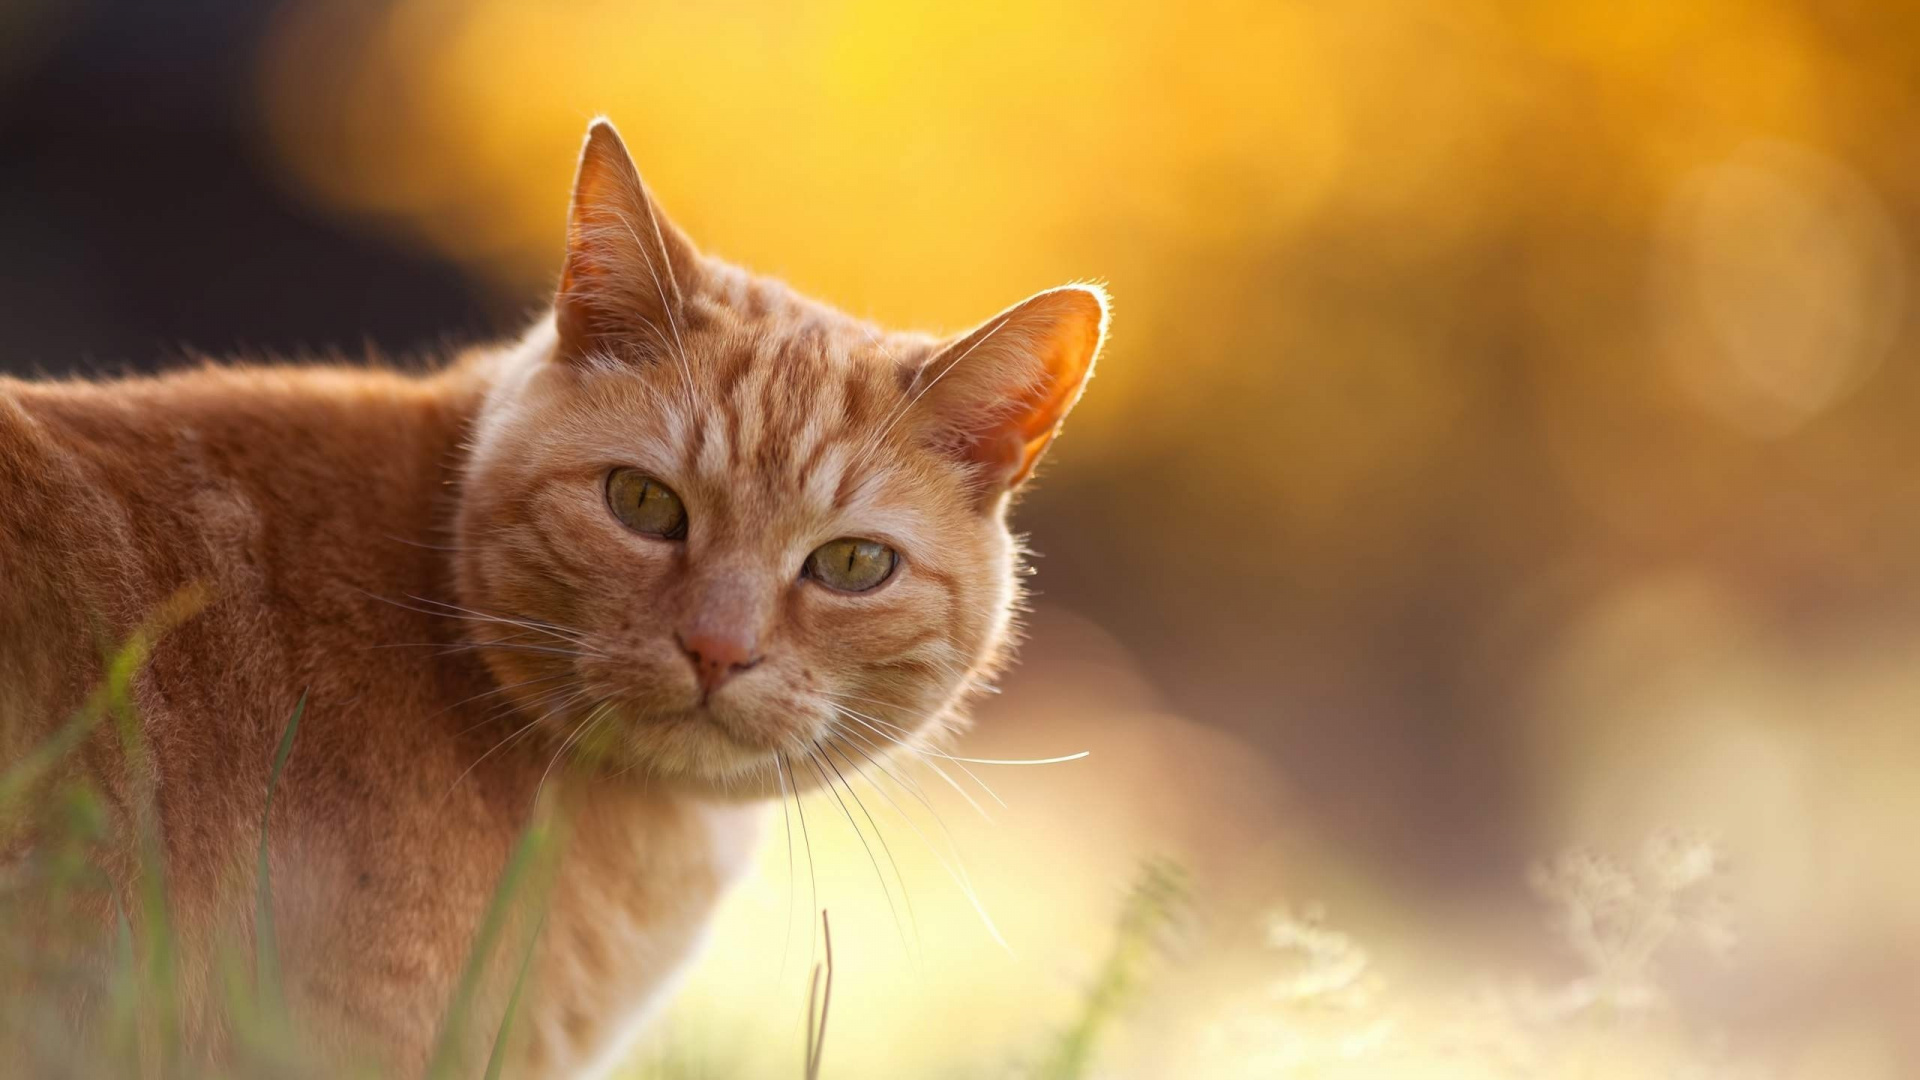 Orange Tabby Cat on Green Grass During Daytime. Wallpaper in 1920x1080 Resolution